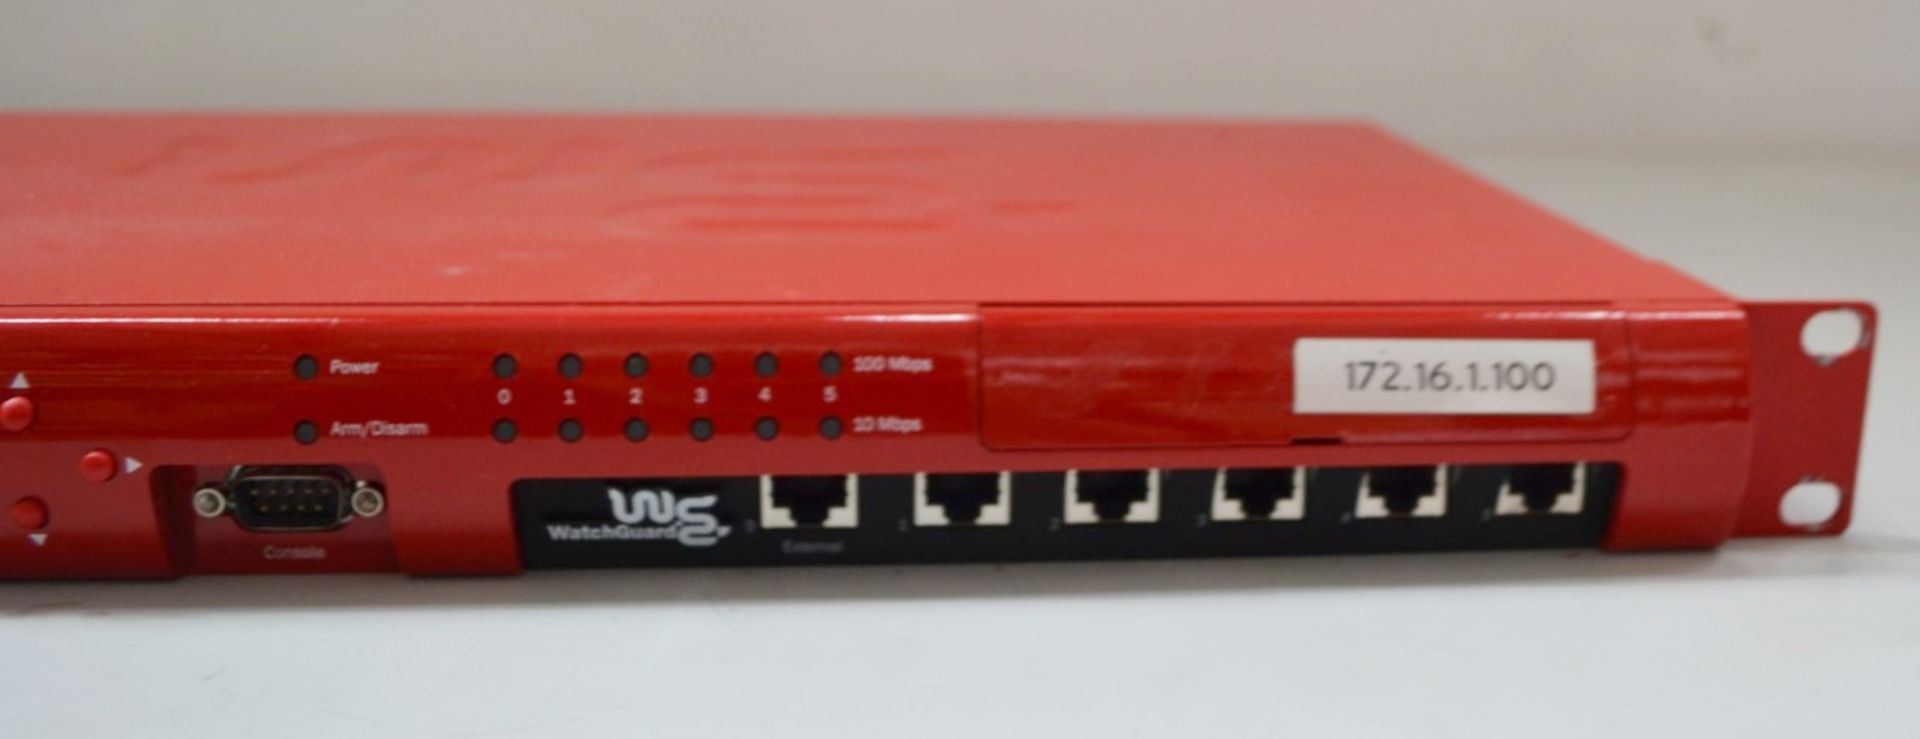 3 x Red Watchguard Firebox Security System's - Ref: LD359 - CL409 - Altrincham WA14 - Image 5 of 13